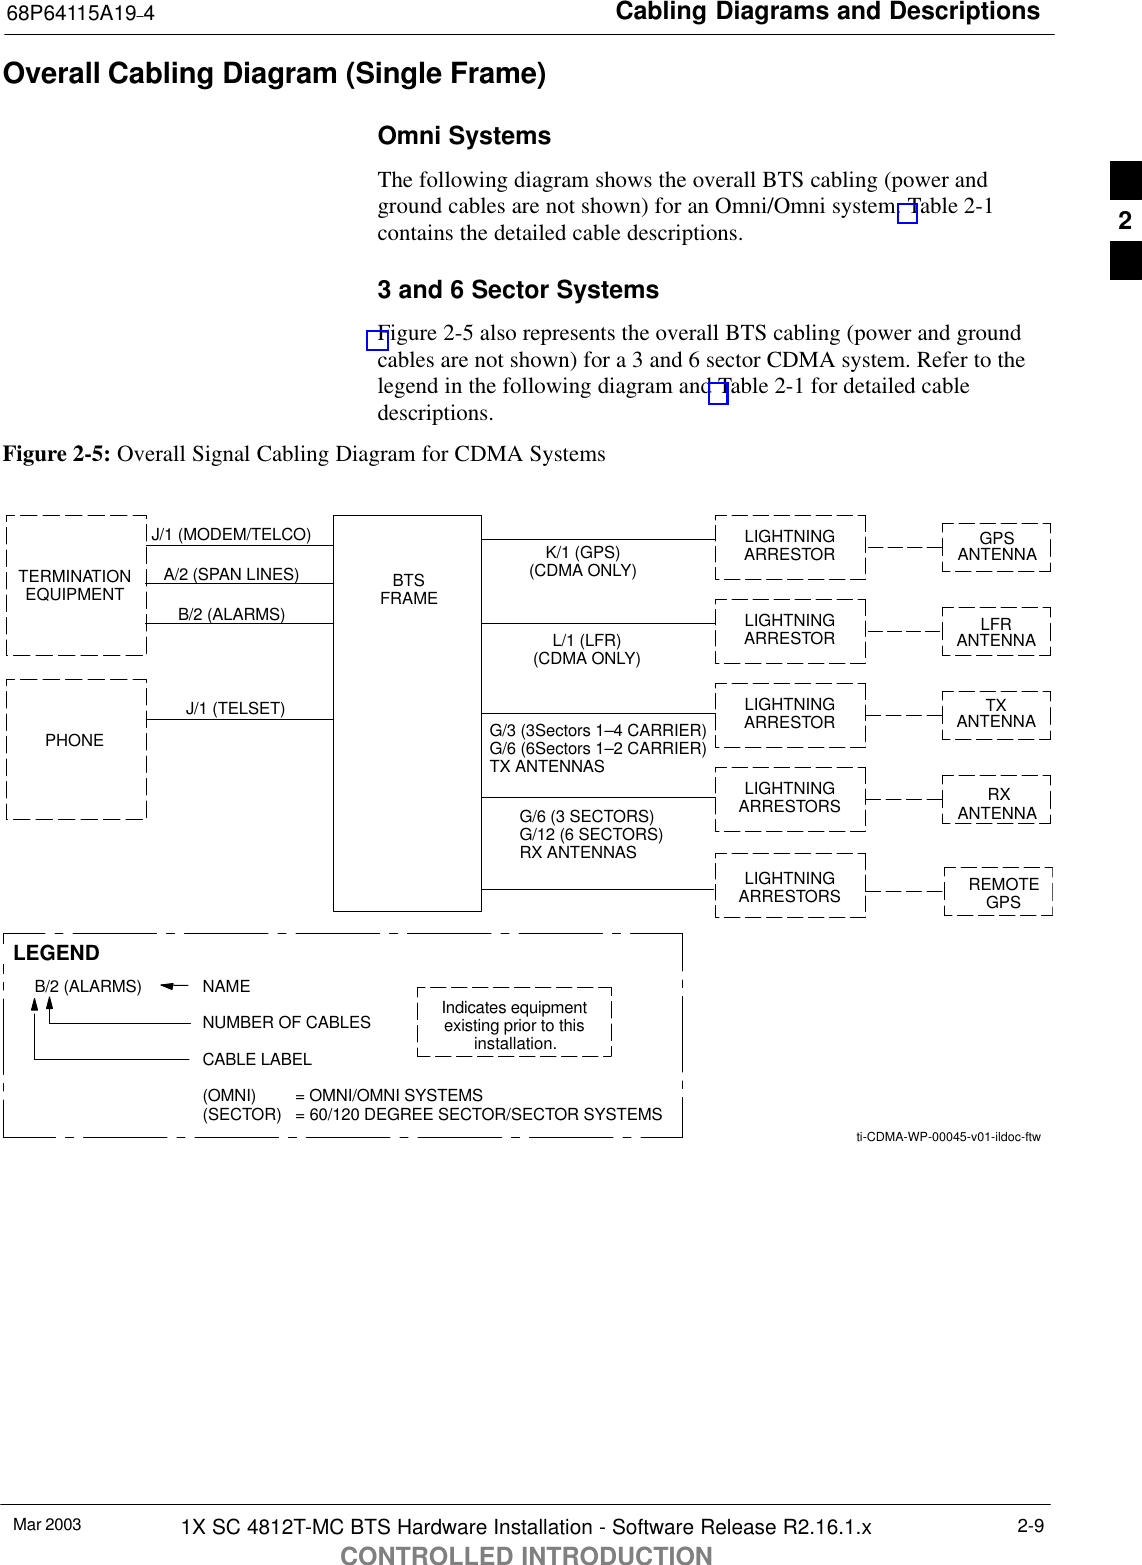 Cabling Diagrams and Descriptions68P64115A19–4Mar 2003 1X SC 4812T-MC BTS Hardware Installation - Software Release R2.16.1.xCONTROLLED INTRODUCTION2-9Overall Cabling Diagram (Single Frame)Omni SystemsThe following diagram shows the overall BTS cabling (power andground cables are not shown) for an Omni/Omni system. Table 2-1contains the detailed cable descriptions.3 and 6 Sector SystemsFigure 2-5 also represents the overall BTS cabling (power and groundcables are not shown) for a 3 and 6 sector CDMA system. Refer to thelegend in the following diagram and Table 2-1 for detailed cabledescriptions.Figure 2-5: Overall Signal Cabling Diagram for CDMA SystemsA/2 (SPAN LINES)J/1 (MODEM/TELCO)J/1 (TELSET)NAMENUMBER OF CABLESCABLE LABEL(OMNI)  = OMNI/OMNI SYSTEMS(SECTOR) = 60/120 DEGREE SECTOR/SECTOR SYSTEMSB/2 (ALARMS)TERMINATIONEQUIPMENTLIGHTNINGARRESTORSG/6 (3 SECTORS)G/12 (6 SECTORS)RX ANTENNASLIGHTNINGARRESTOR ANTENNAK/1 (GPS)(CDMA ONLY)LIGHTNINGARRESTORL/1 (LFR)(CDMA ONLY)Indicates equipmentexisting prior to thisinstallation.B/2 (ALARMS)LEGENDLIGHTNINGARRESTORG/3 (3Sectors 1–4 CARRIER)G/6 (6Sectors 1–2 CARRIER)TX ANTENNASBTSFRAMEPHONEGPSANTENNALFRANTENNATXANTENNARXREMOTEGPSLIGHTNINGARRESTORSti-CDMA-WP-00045-v01-ildoc-ftw2